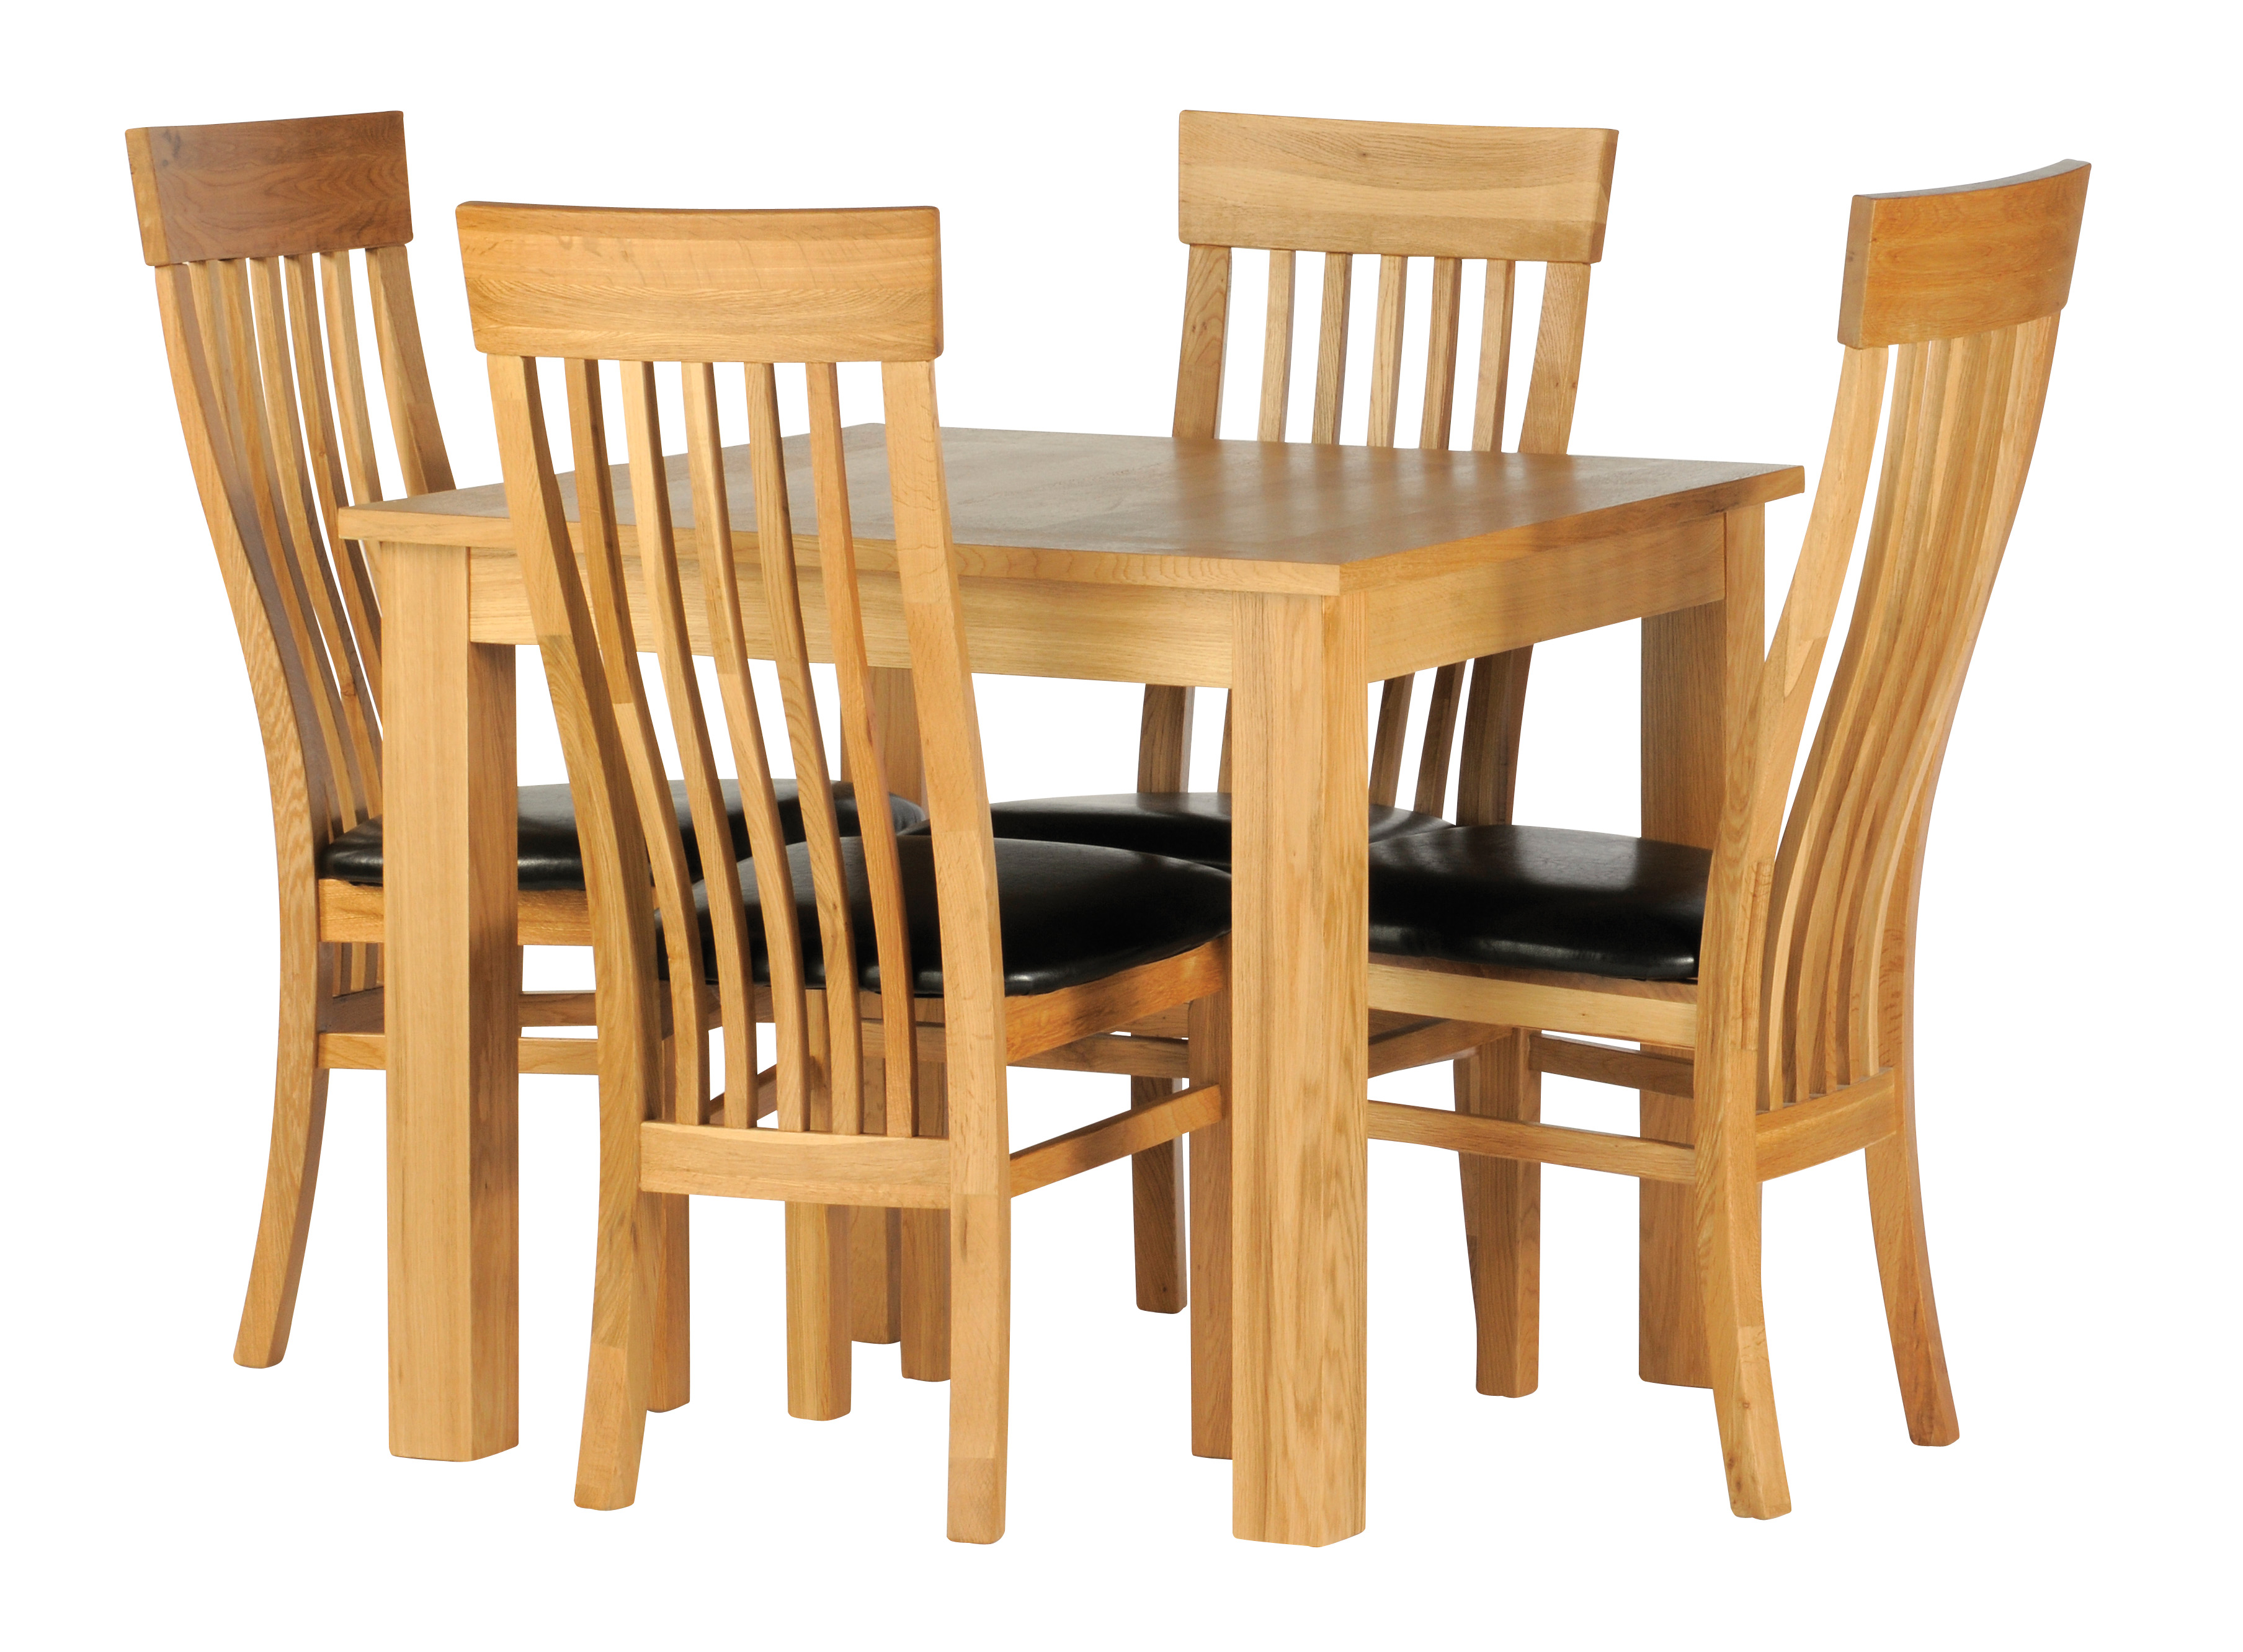 Enhance your dining room with table chairs - Elites Home Decor